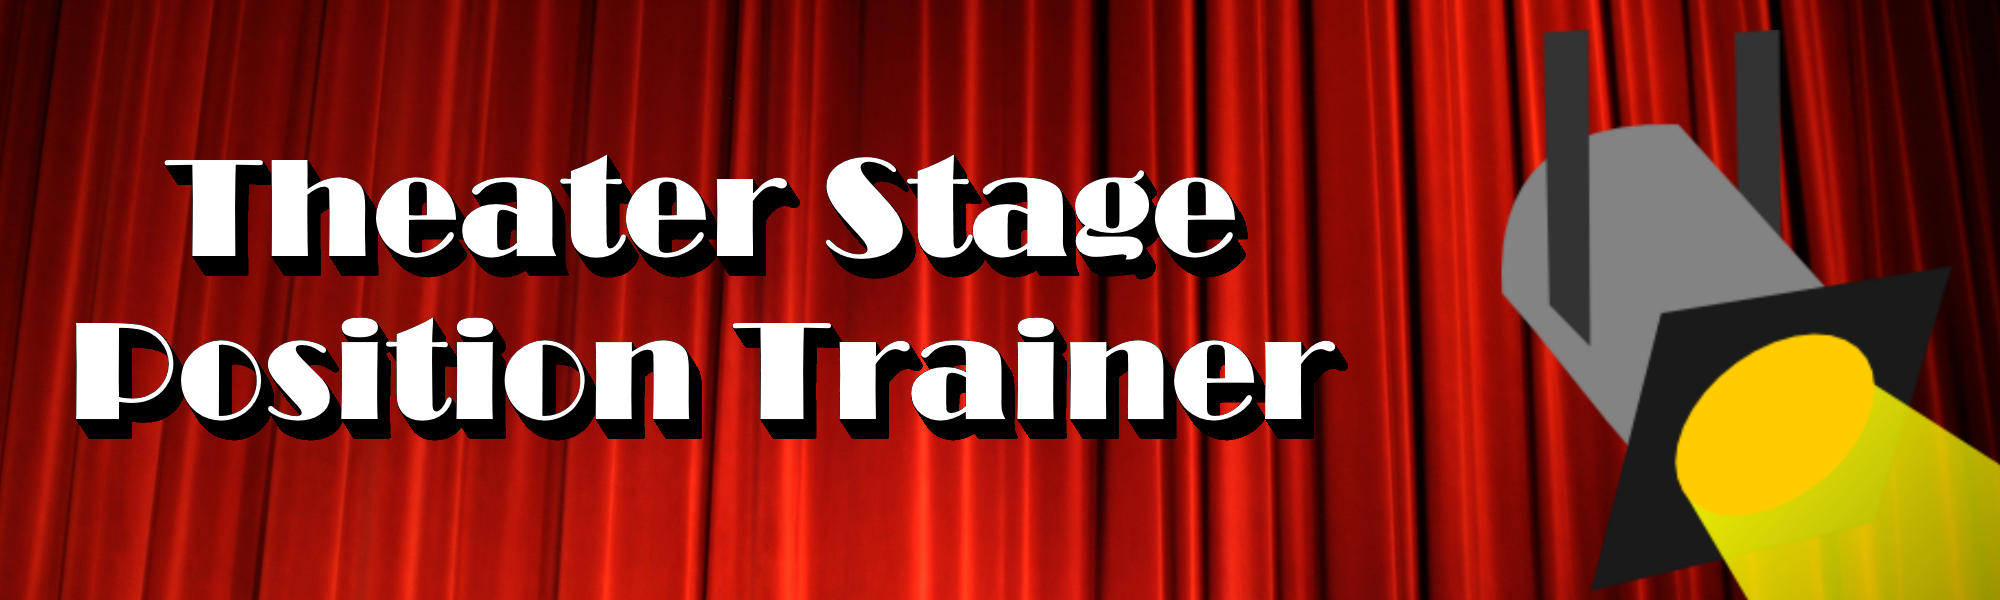 Theater Stage Position Trainer